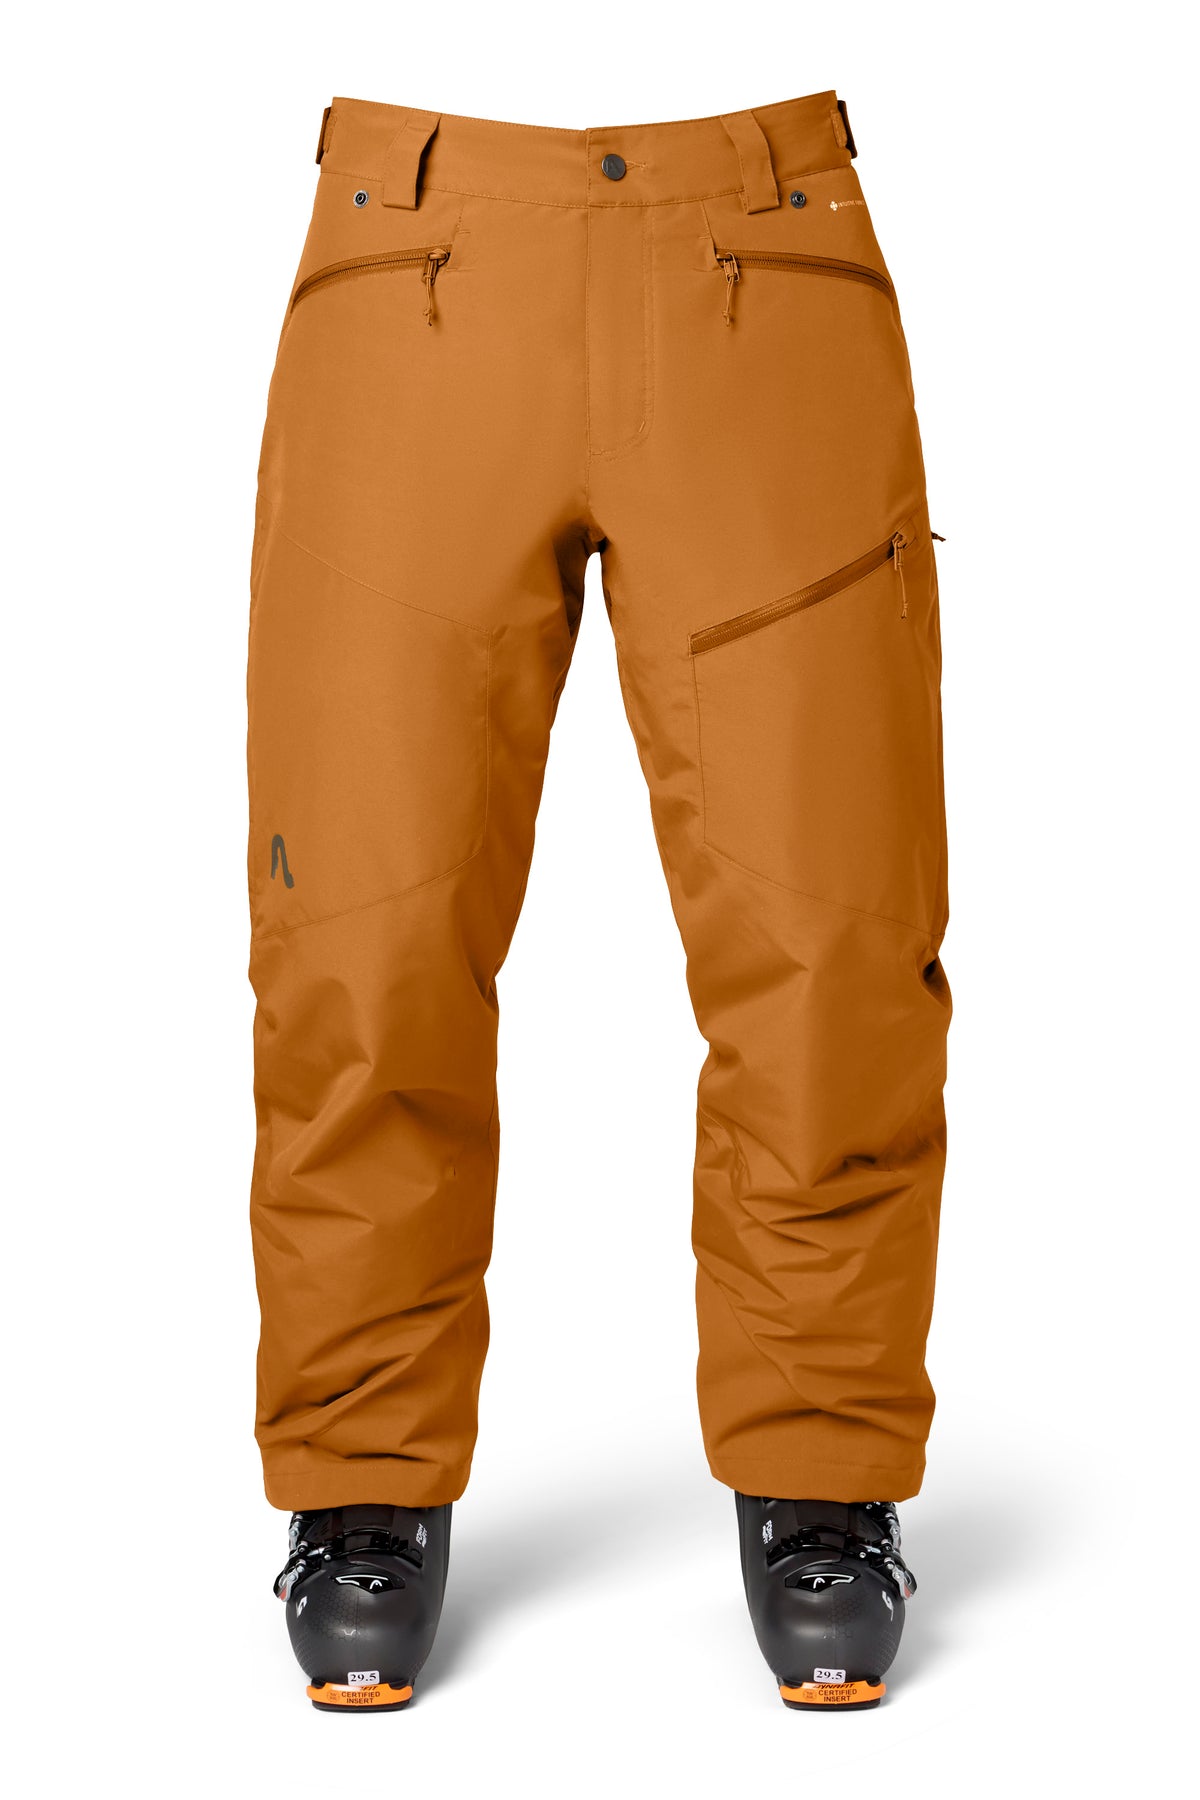 2022 Snowman Insulated Pant - Now On Sale